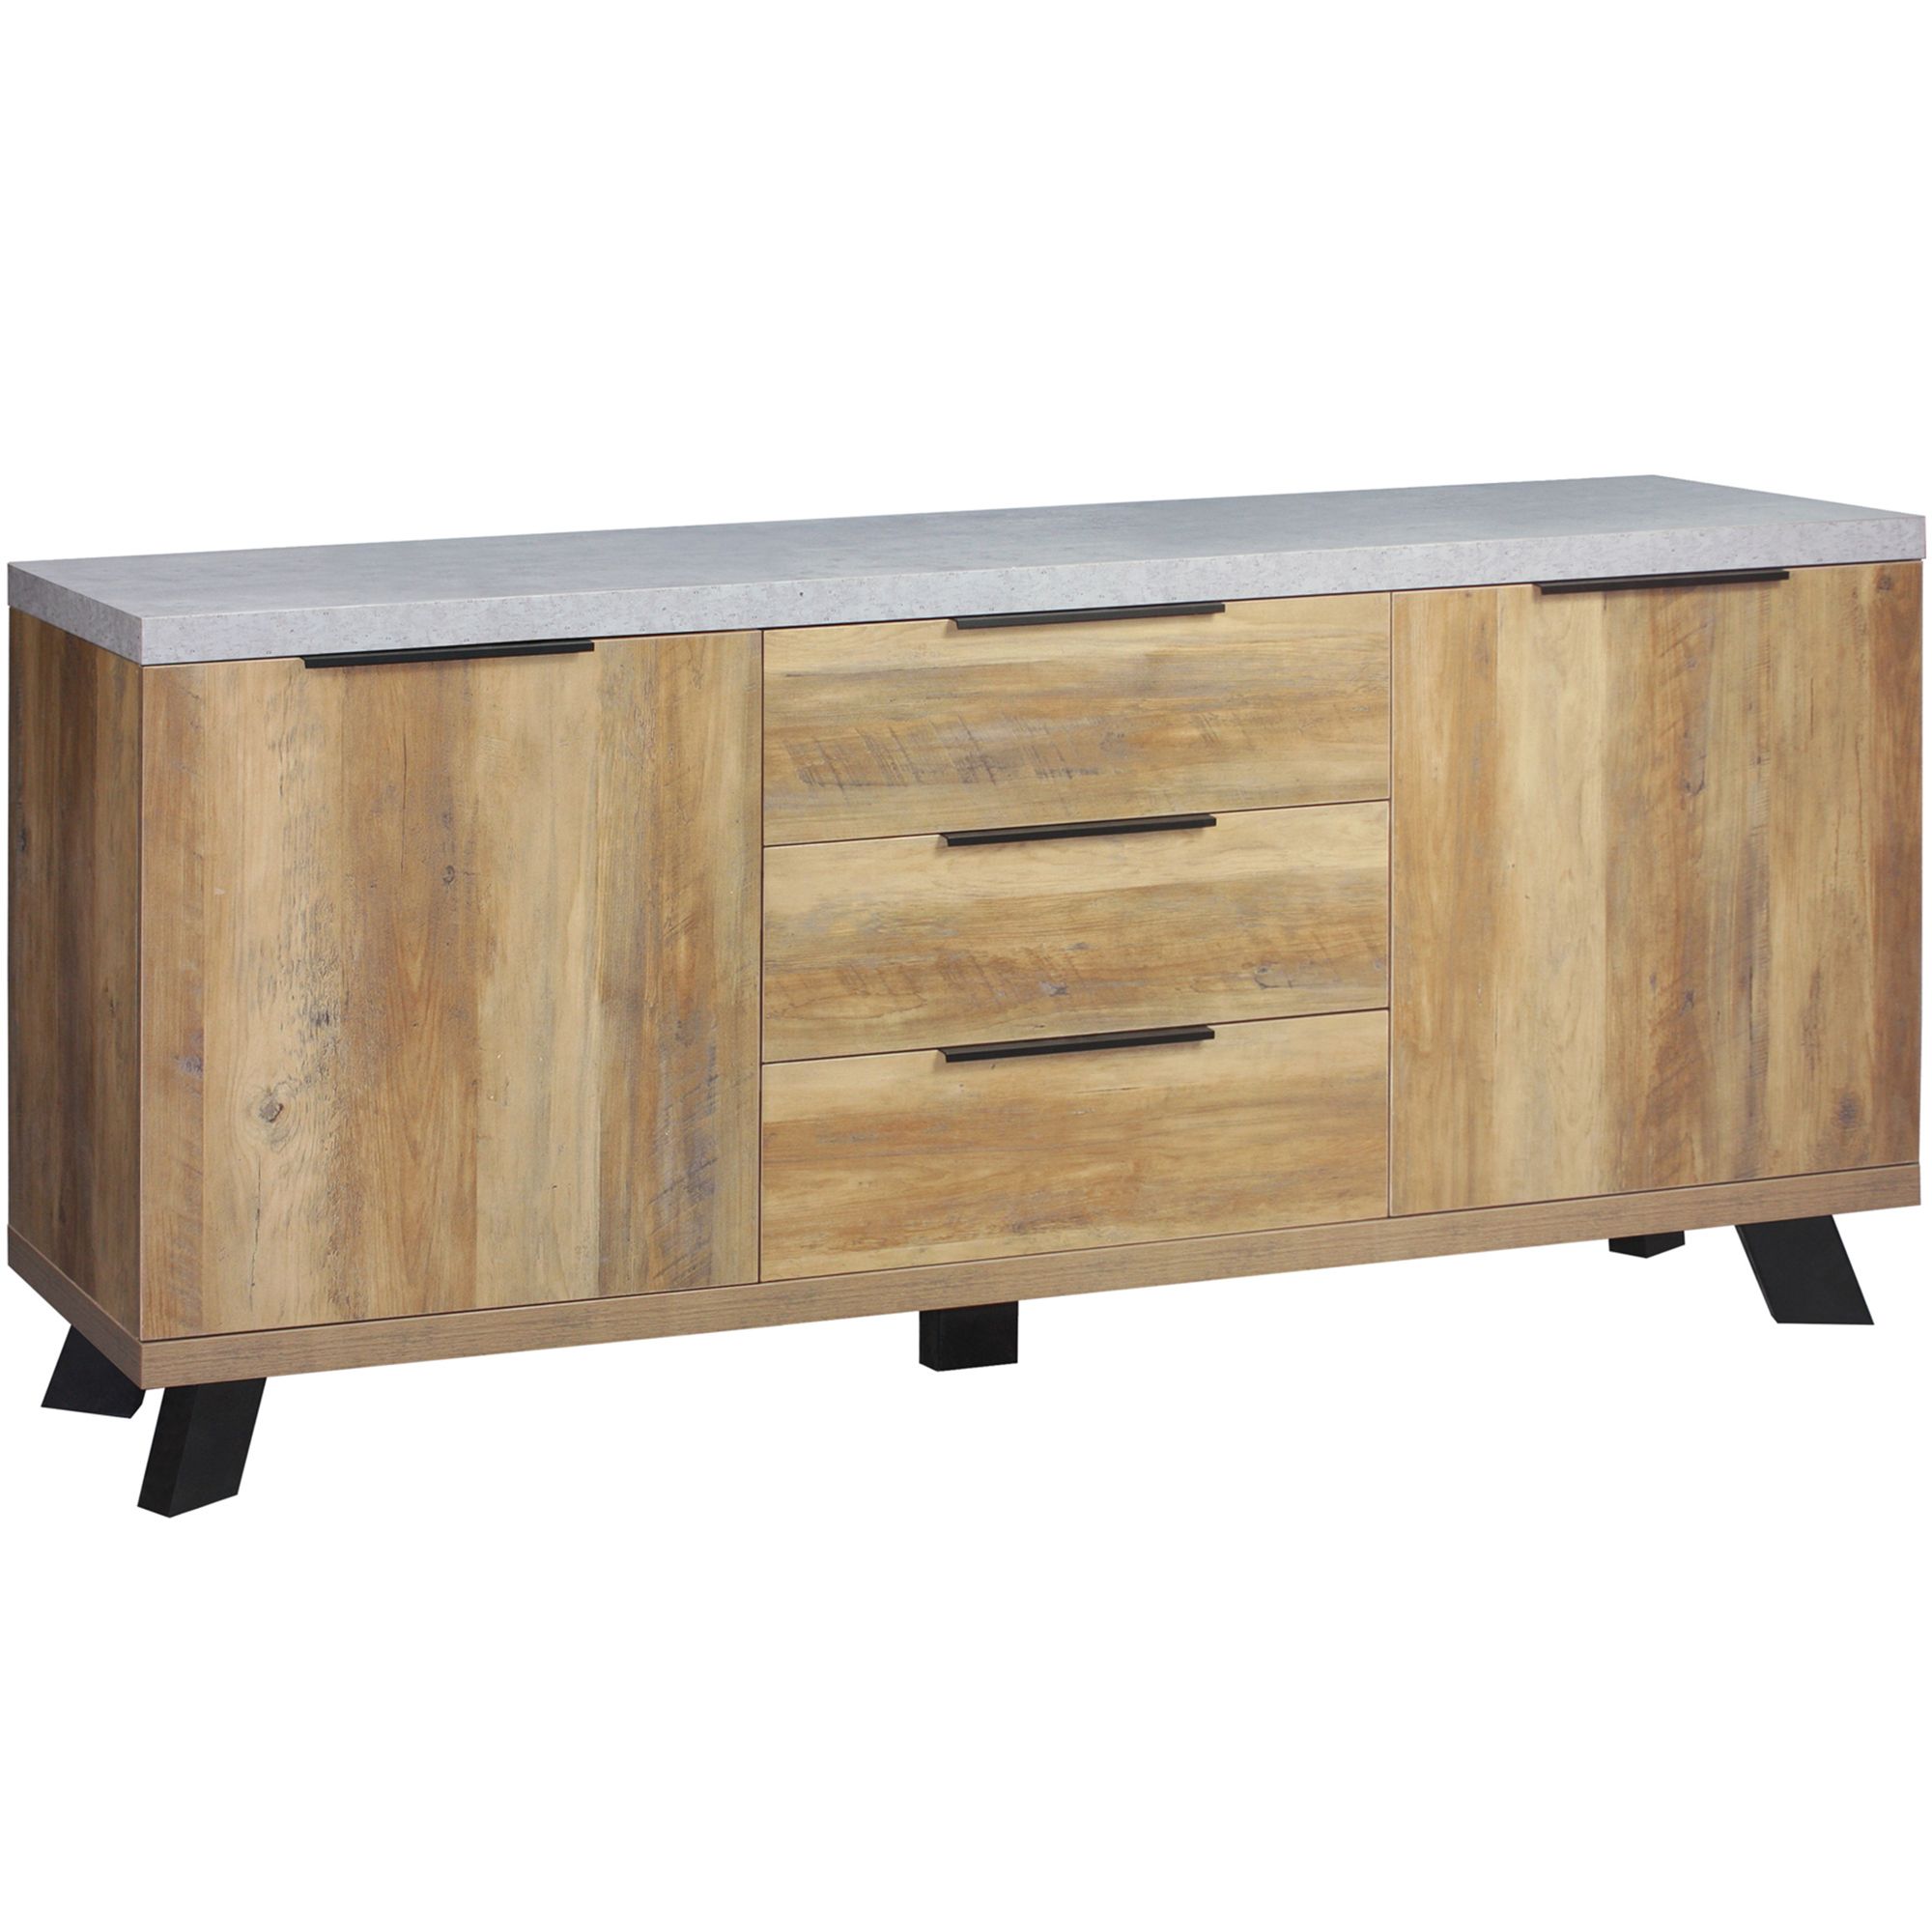 Sideboards & Buffets | Temple & Webster Regarding Modern Lacquer 2 Door 3 Drawer Buffets (View 12 of 30)